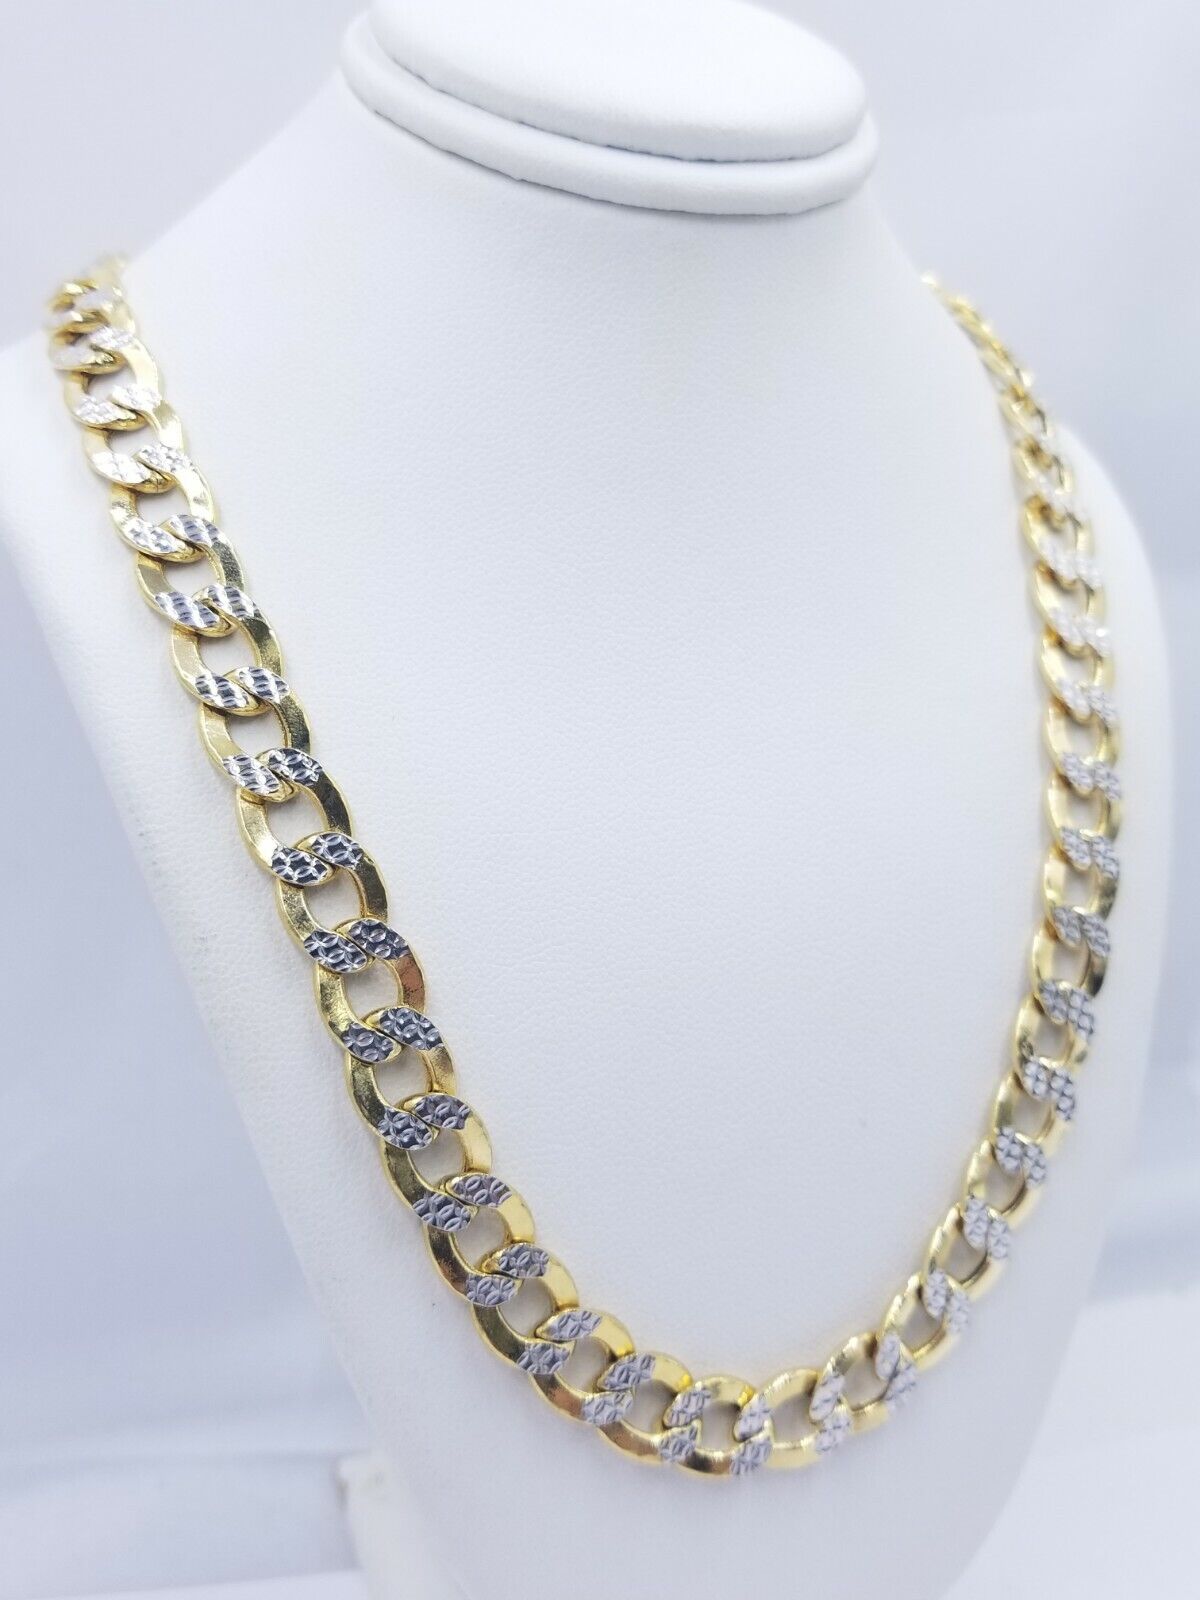 12MM Real Gold Mens Necklace Cuban Link 20-30" Diamond Cut 10k Yellow Gold Chain